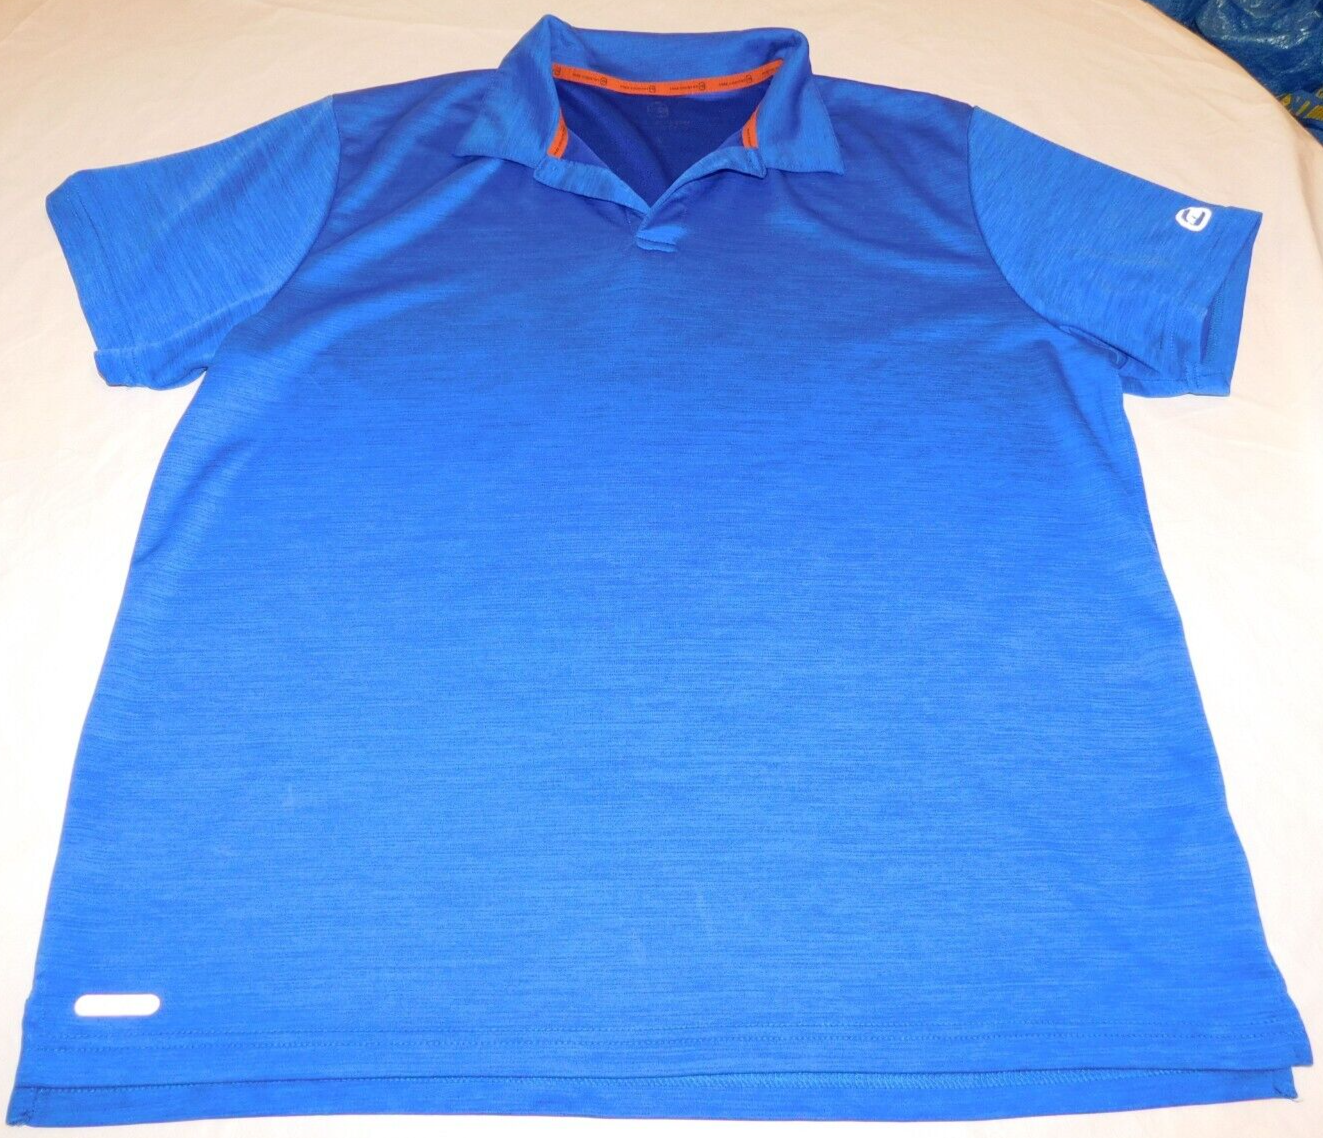 Primary image for Free Country Men's Short Sleeve Polo Shirt Royal Blue Heather Size XL xlarge